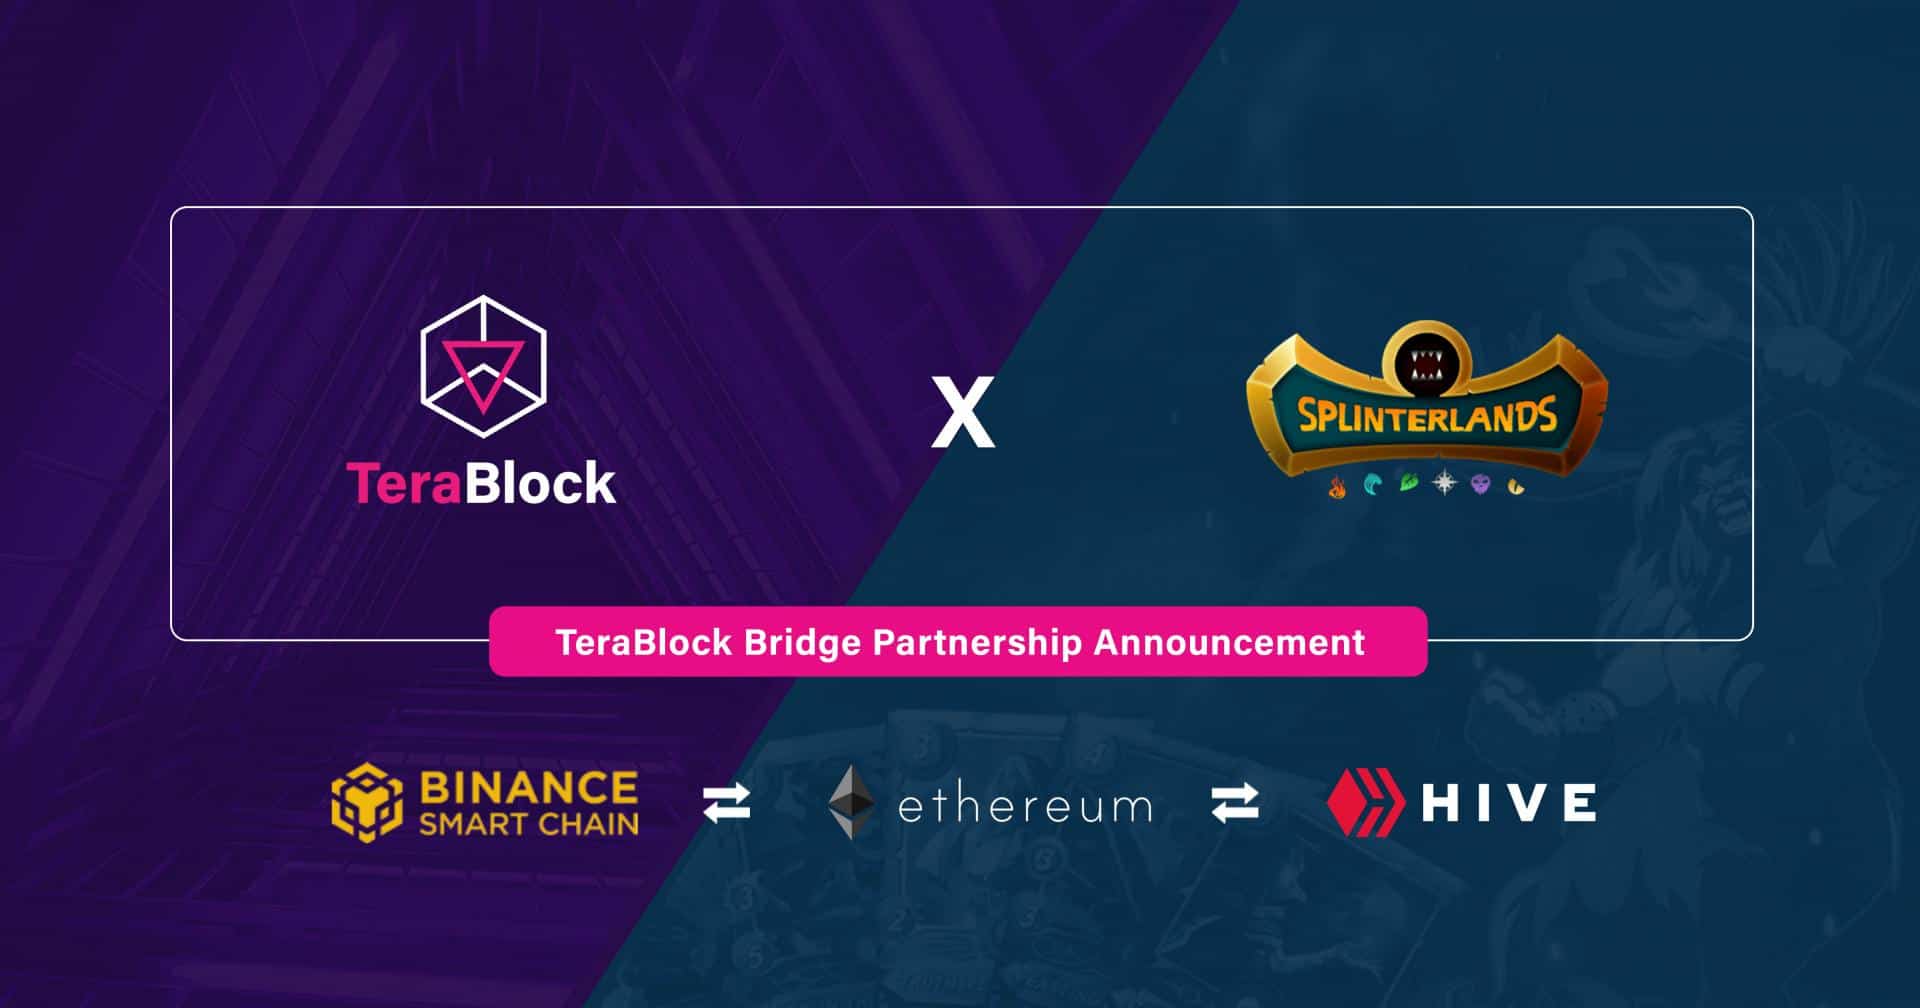 Terablock-collaborates-with-splinterlands-to-take-defi-gaming-to-new-heights